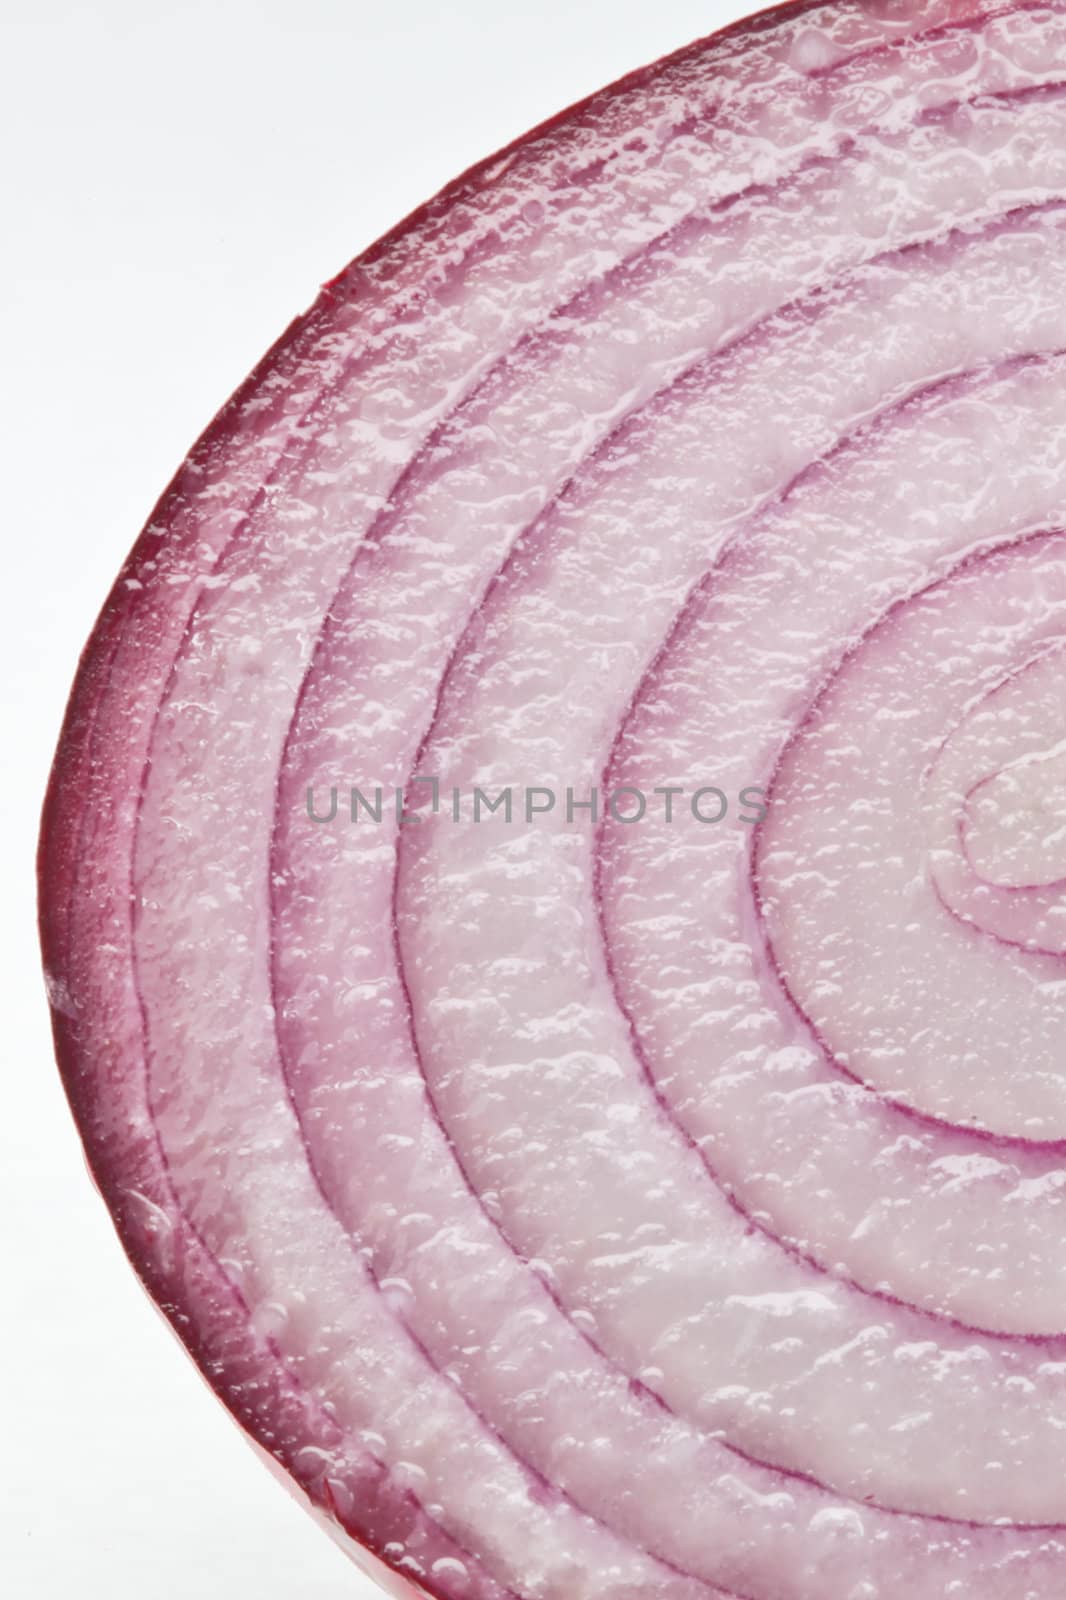 A fresh red onion cut in half exposing the circular rings in a close up shot